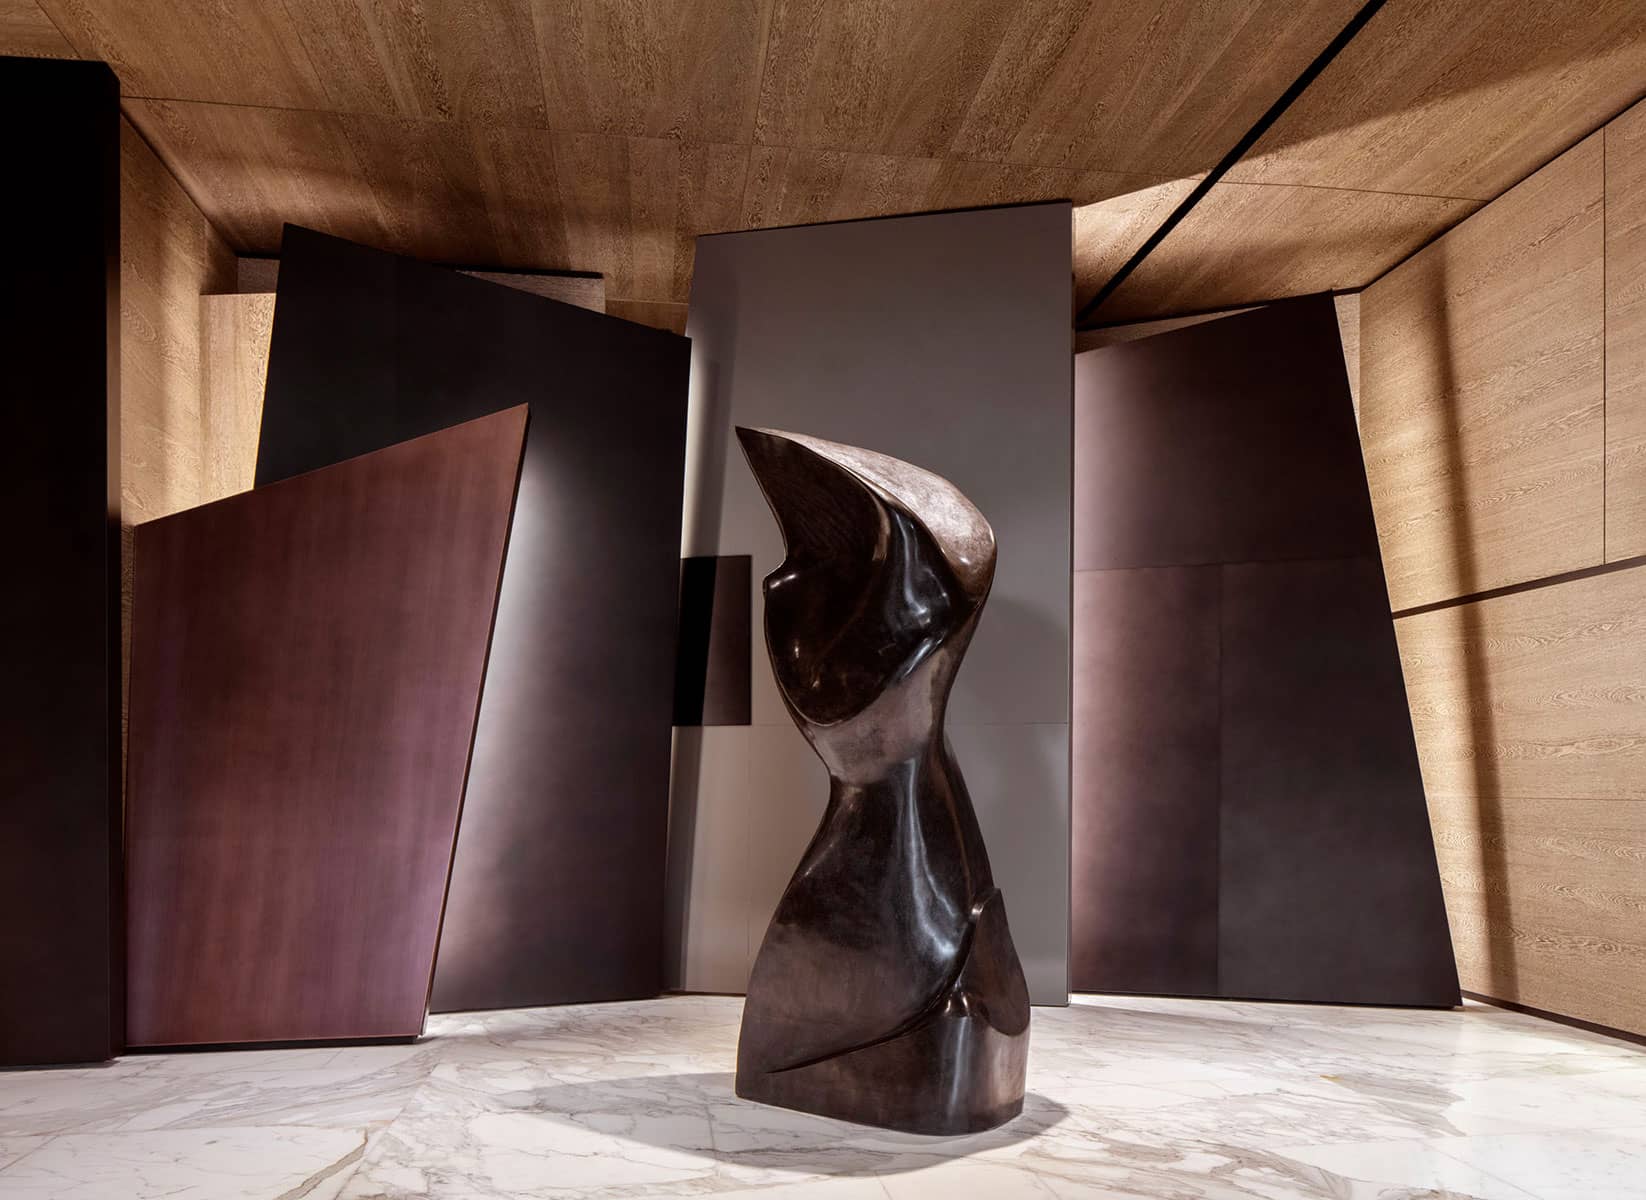 Architecture Photography Dubai: Abstract sculpture, in lobby of contemporary apartment building, Dubai.